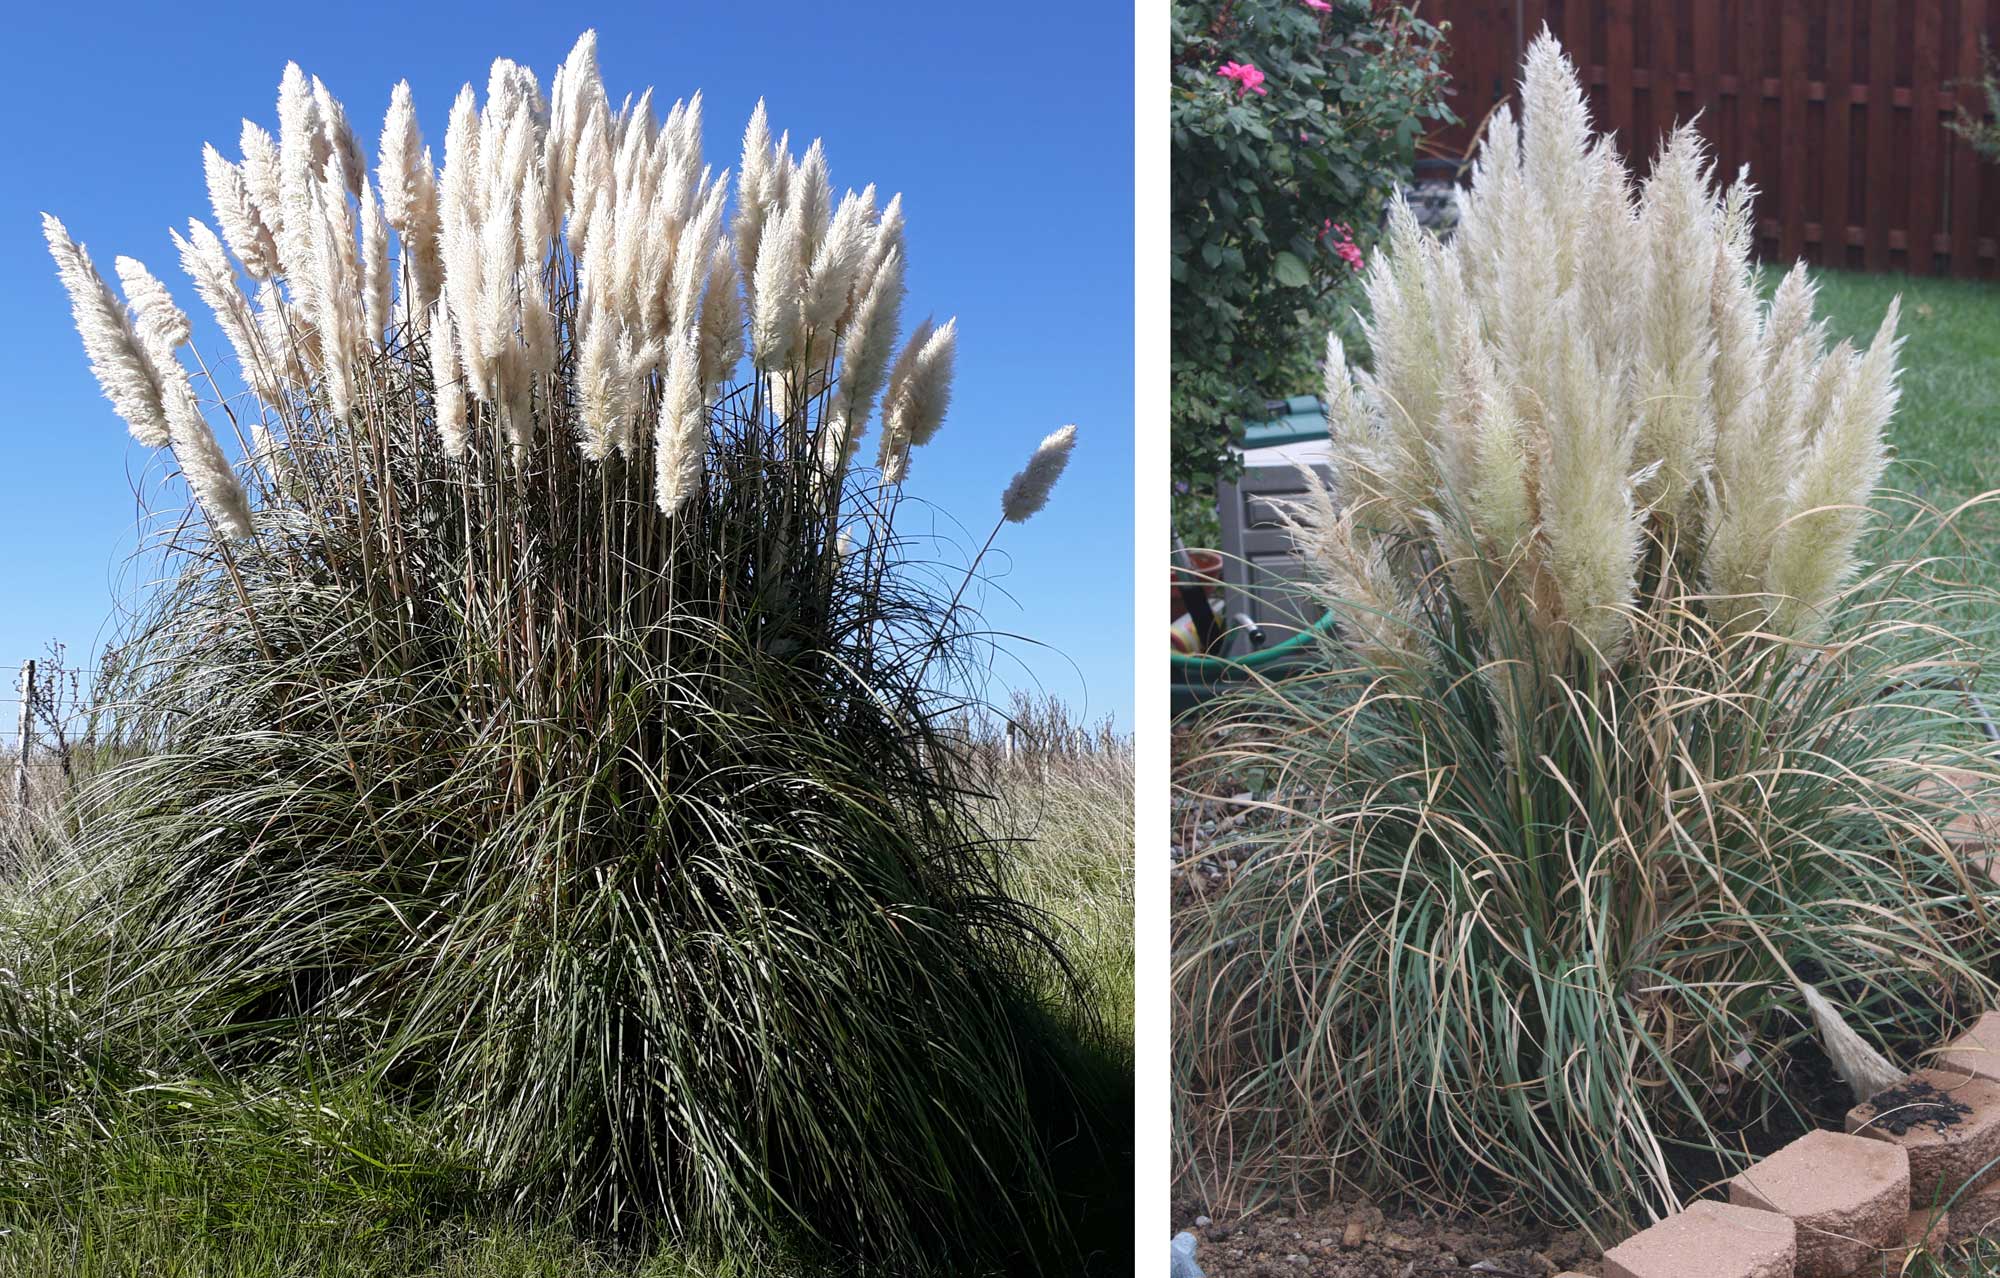 2-panel figure showing photos of pamaps grasses. Panel 1: A clump of pampas grass growing in a field. The photo showing a tight group of tall plants with white, plume-like inflorescences. Panel 2: A clump of ornamental pampas grass growing in a garden. The photo showing a tight group of relatively short plants with white, plume-like inflorescences. 